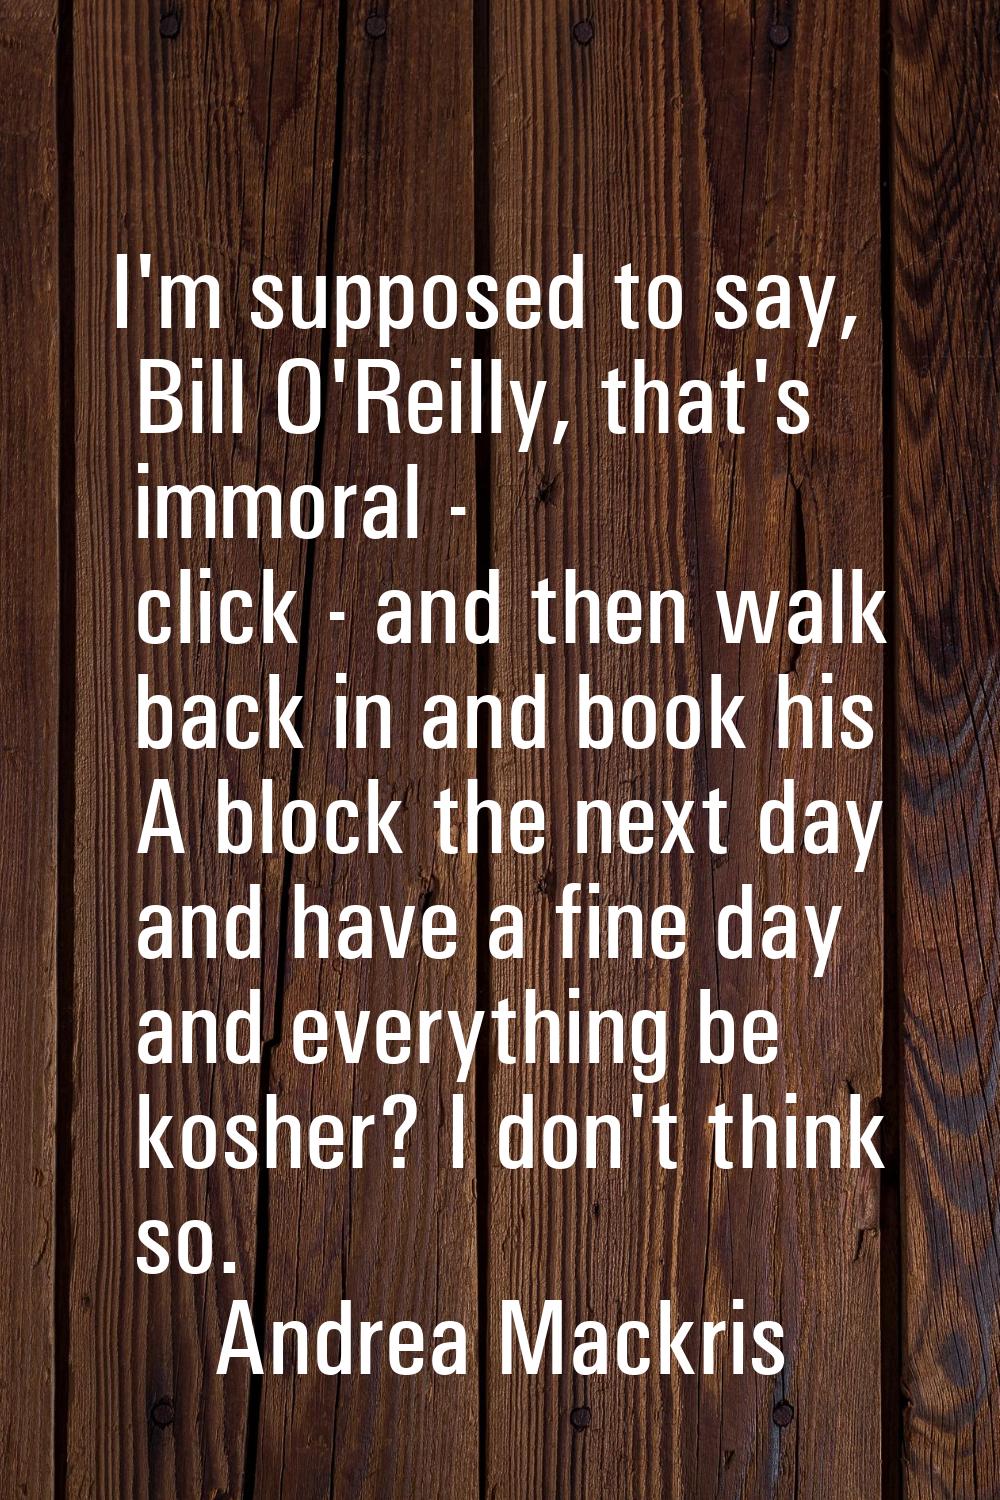 I'm supposed to say, Bill O'Reilly, that's immoral - click - and then walk back in and book his A b